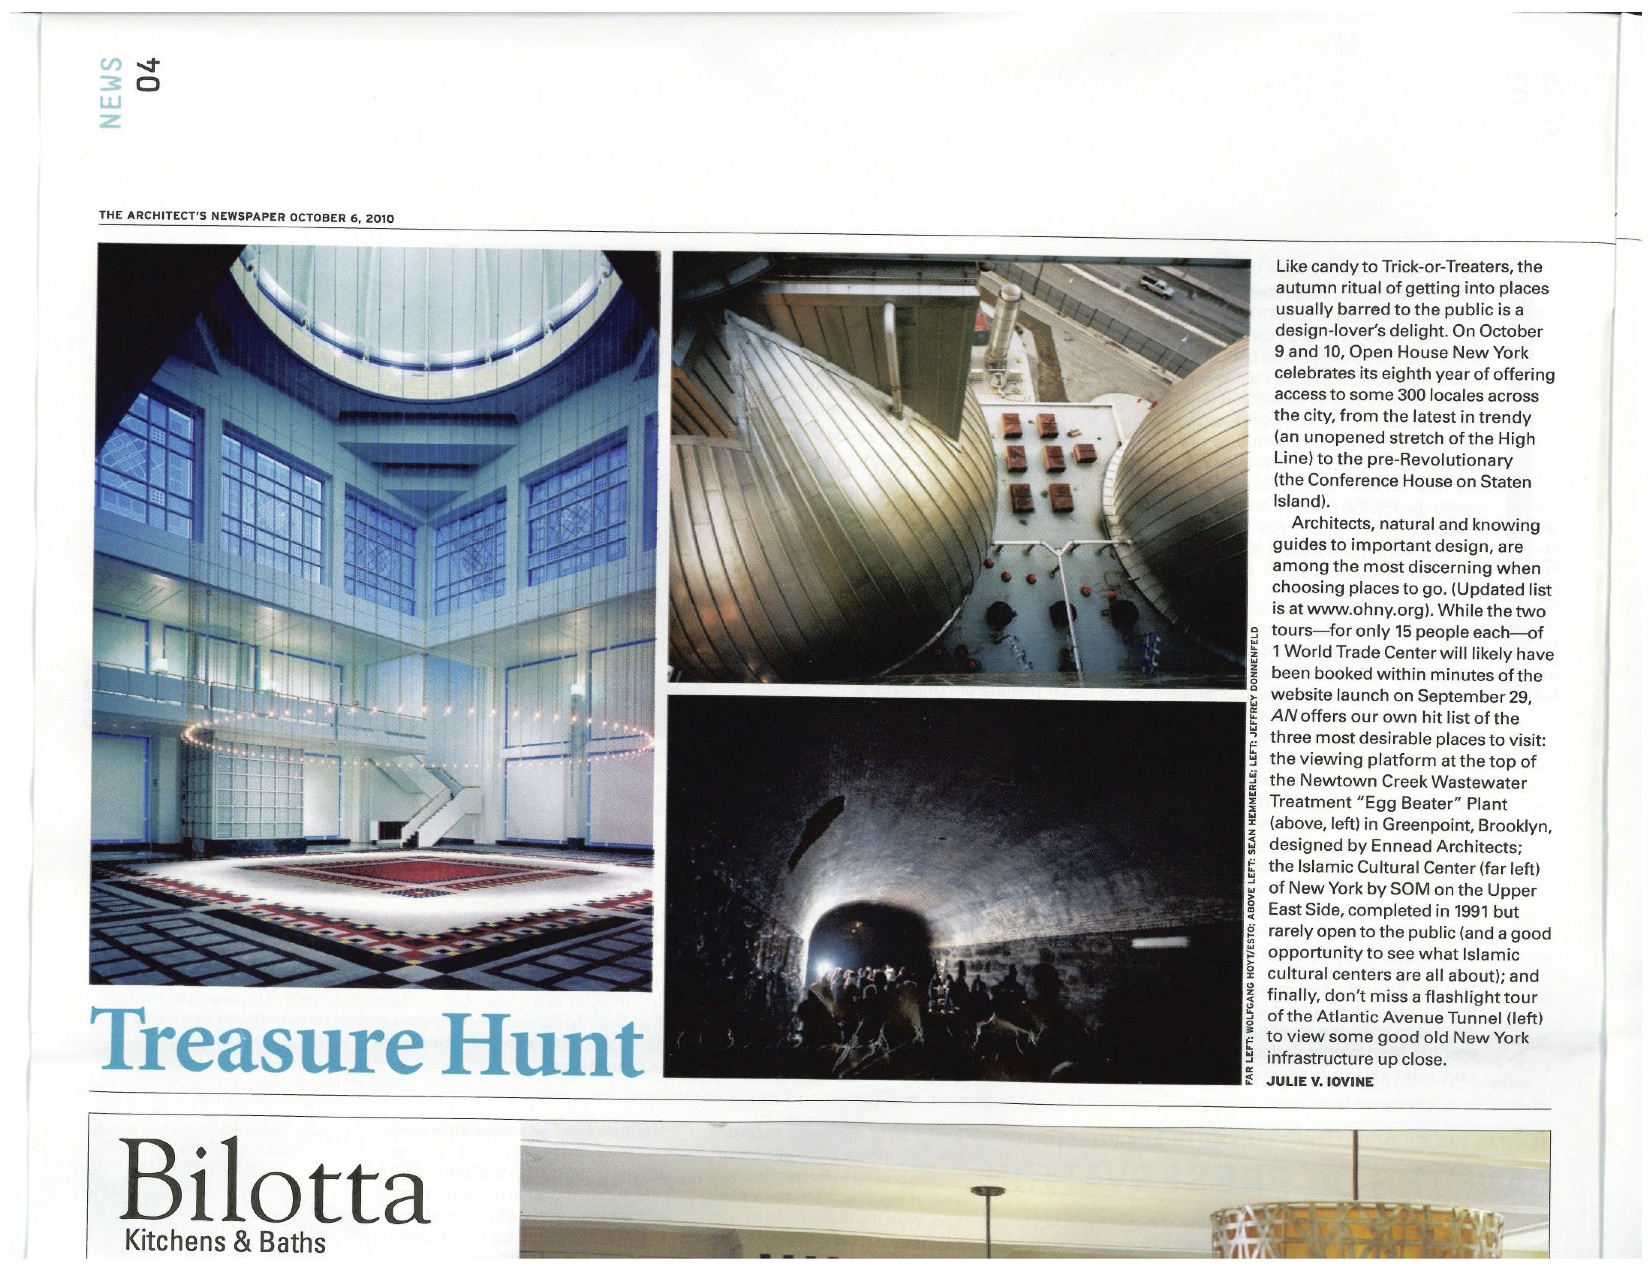 Atlantic Ave Subway Photo Published in The Architect’s Newspaper